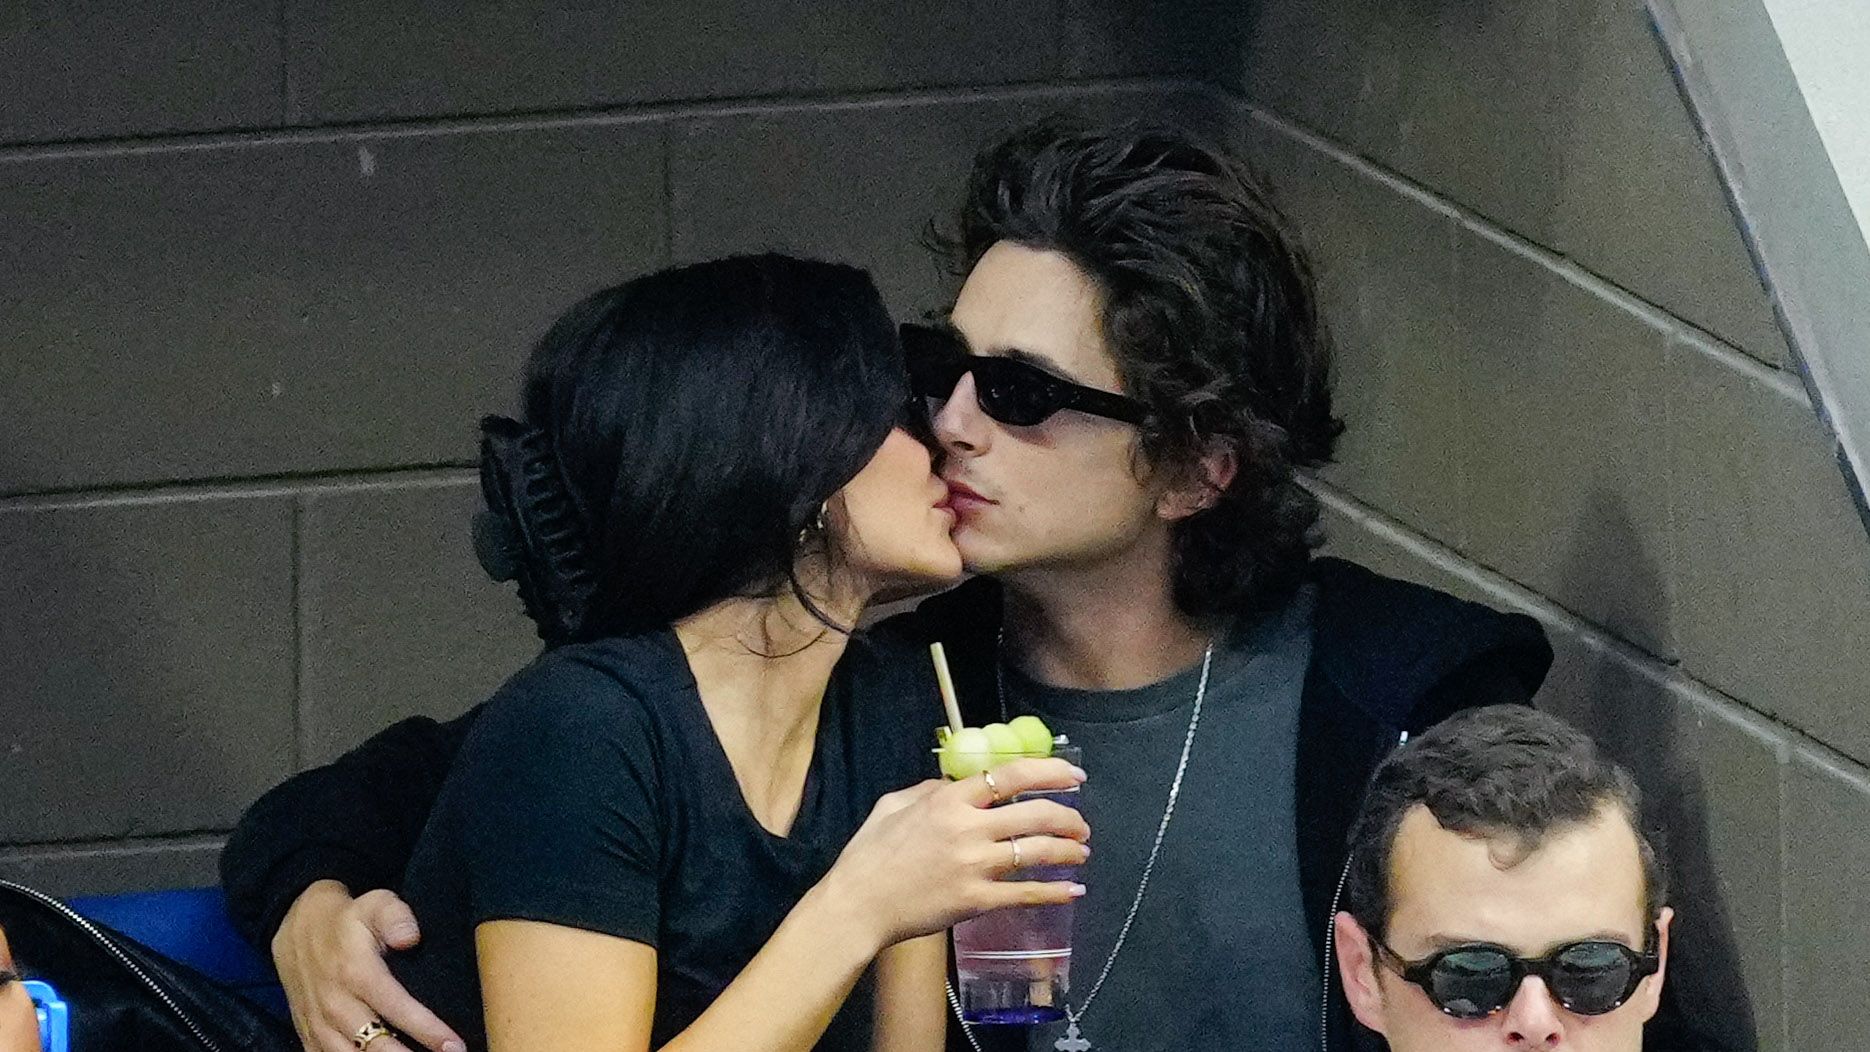 How Kylie Jenner Feels About Timothée Chalamet 6 Months Into Dating